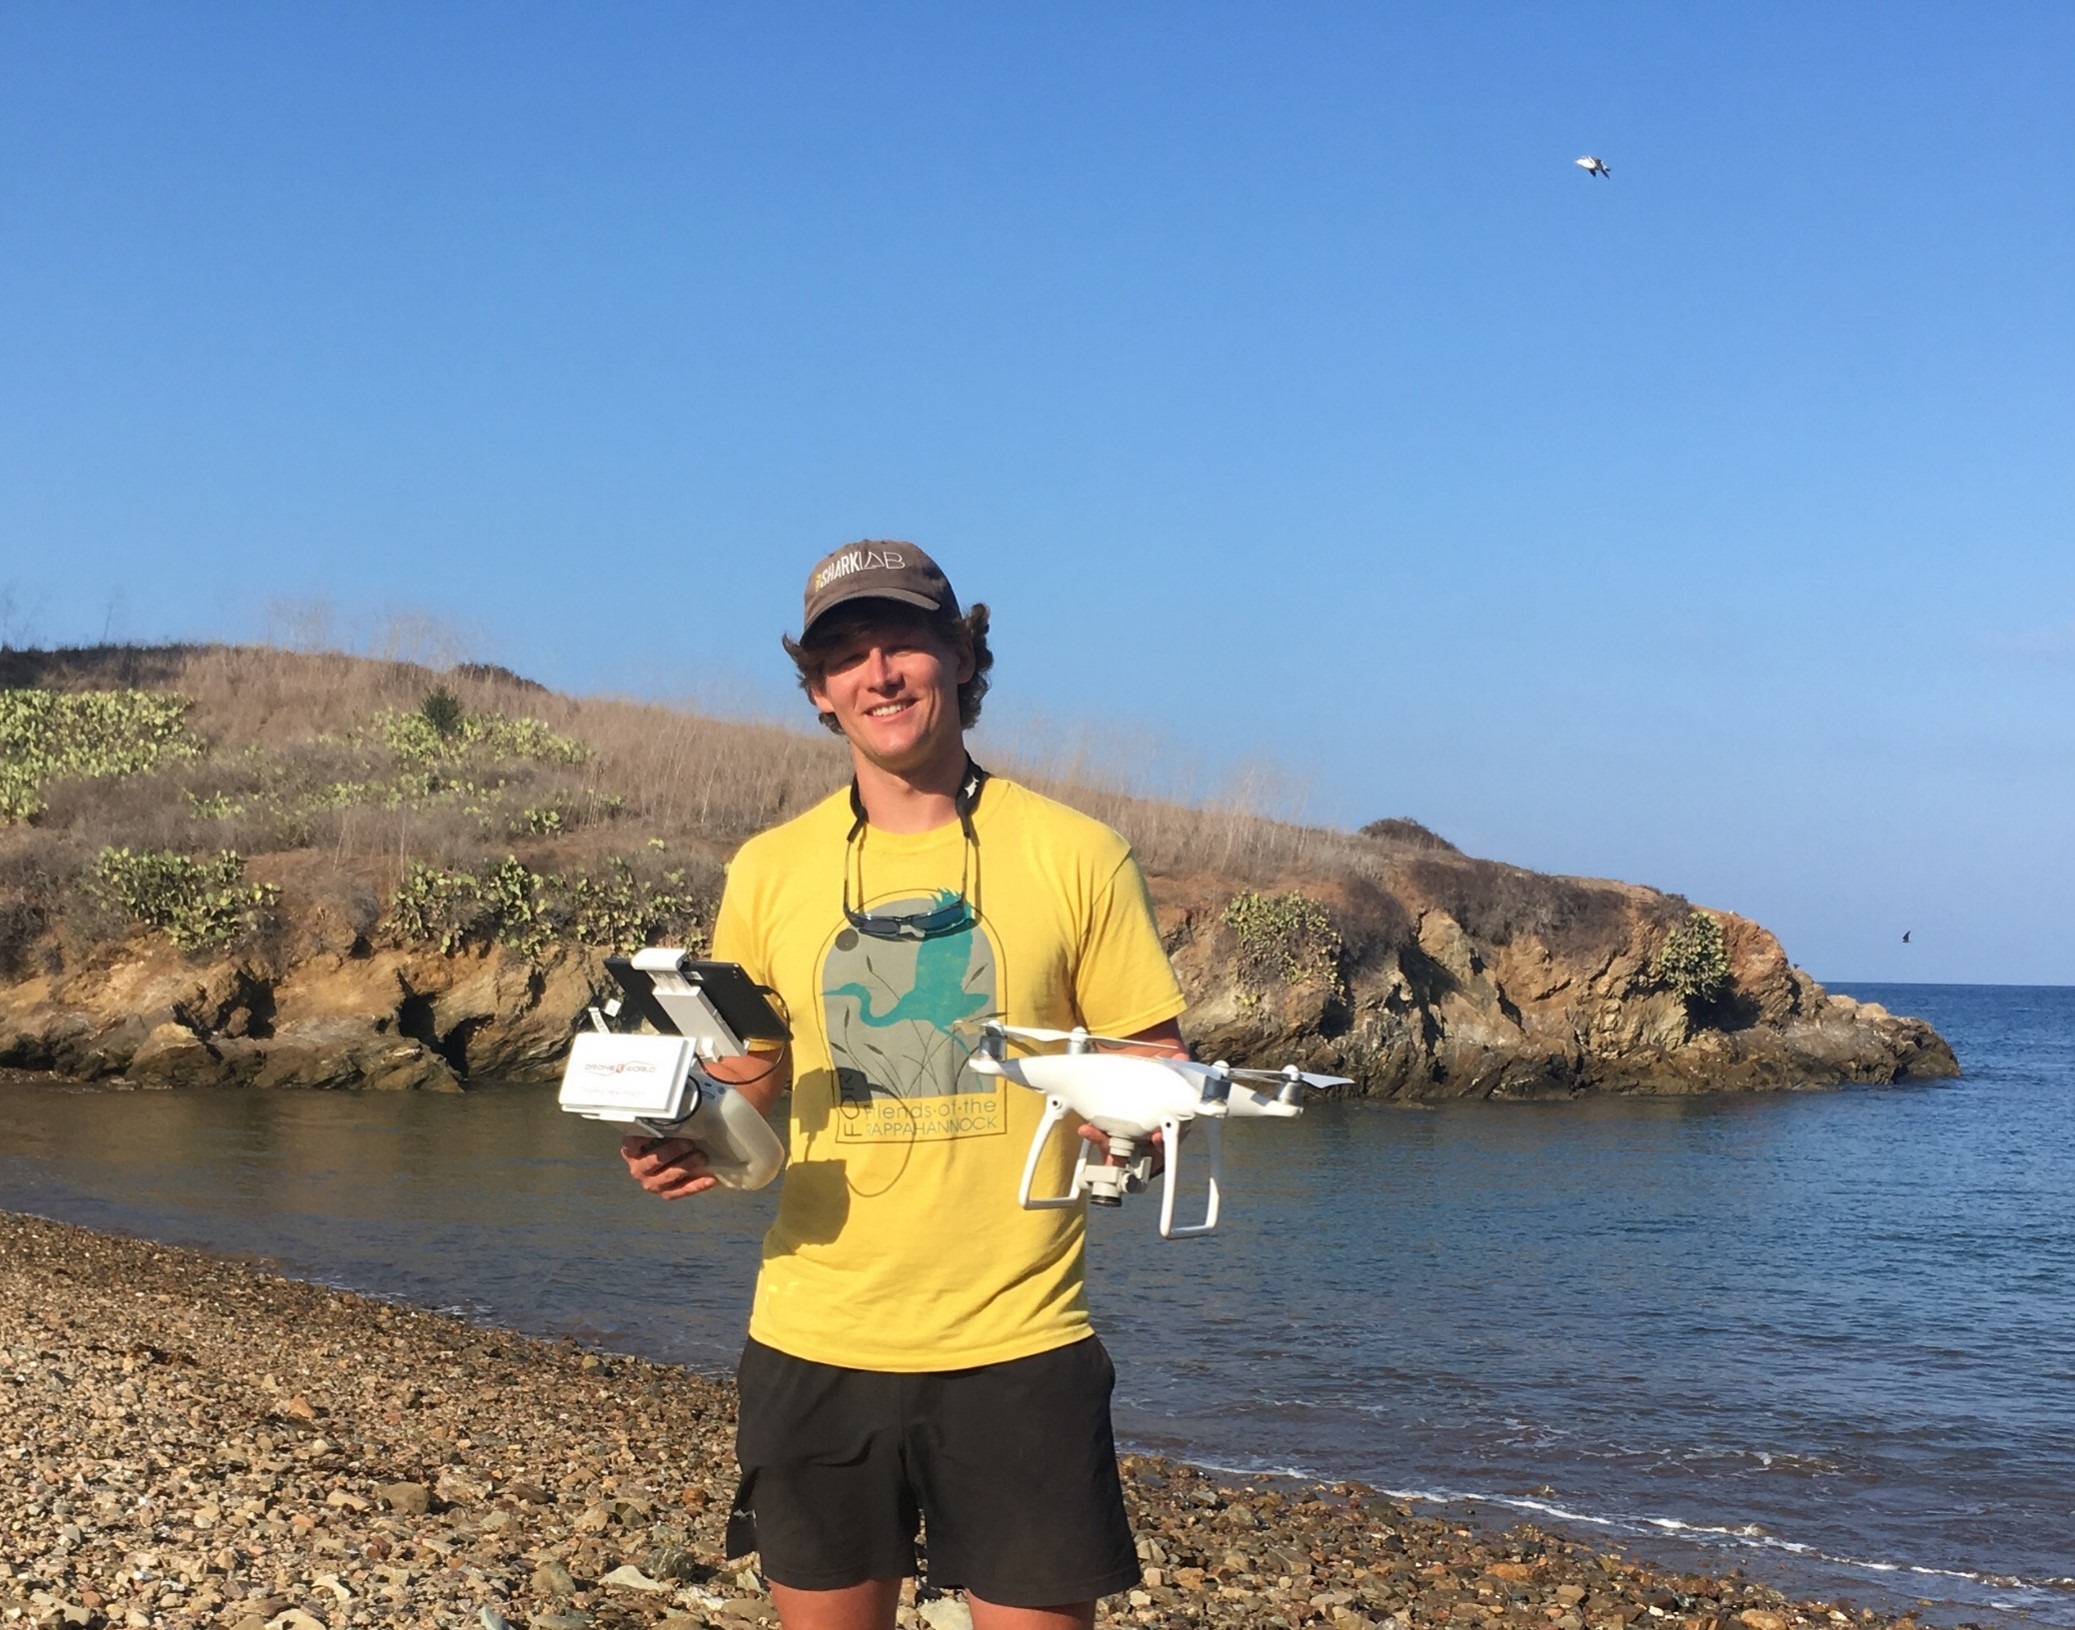 Jack May holding two drones on a rocky beach